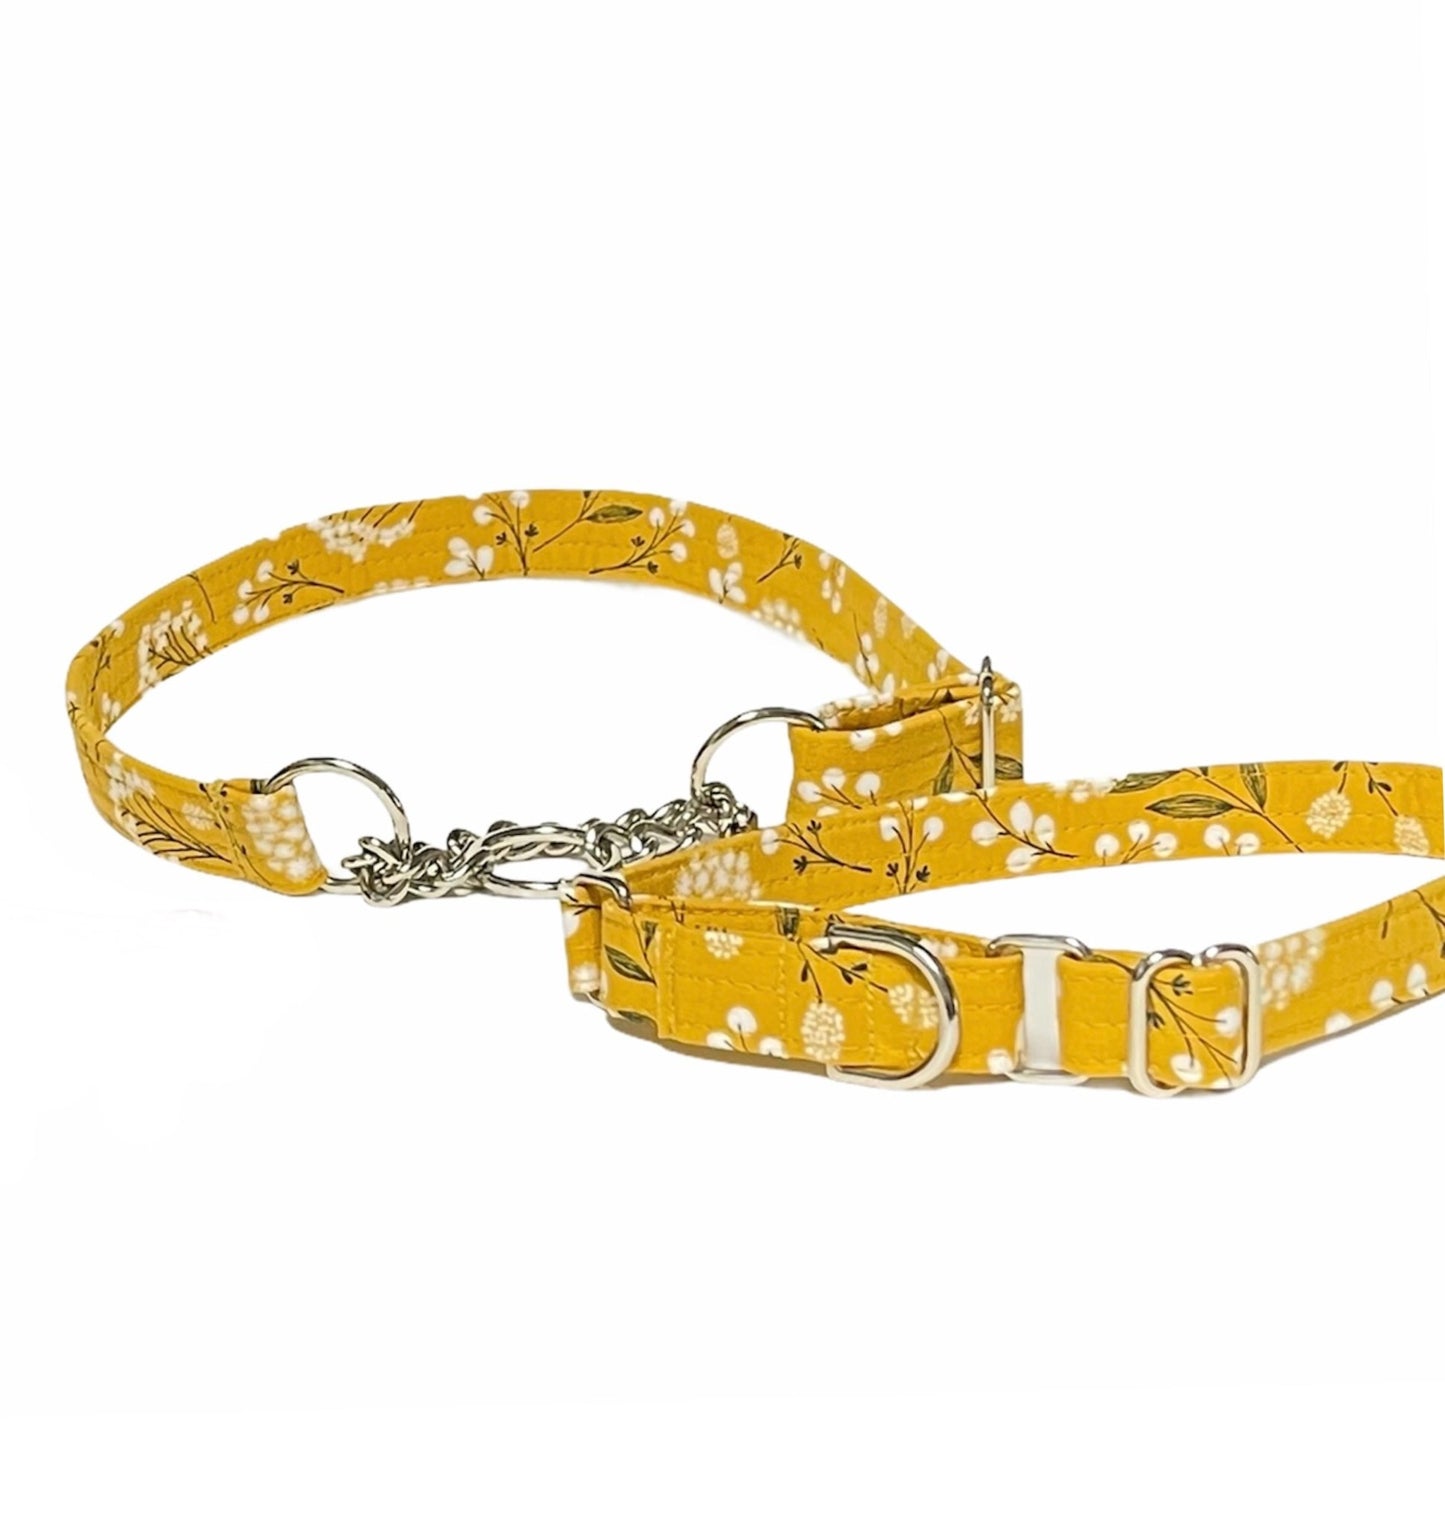 Yellow Floral Martingale Dog Collar- Fabric style - muttsnbones